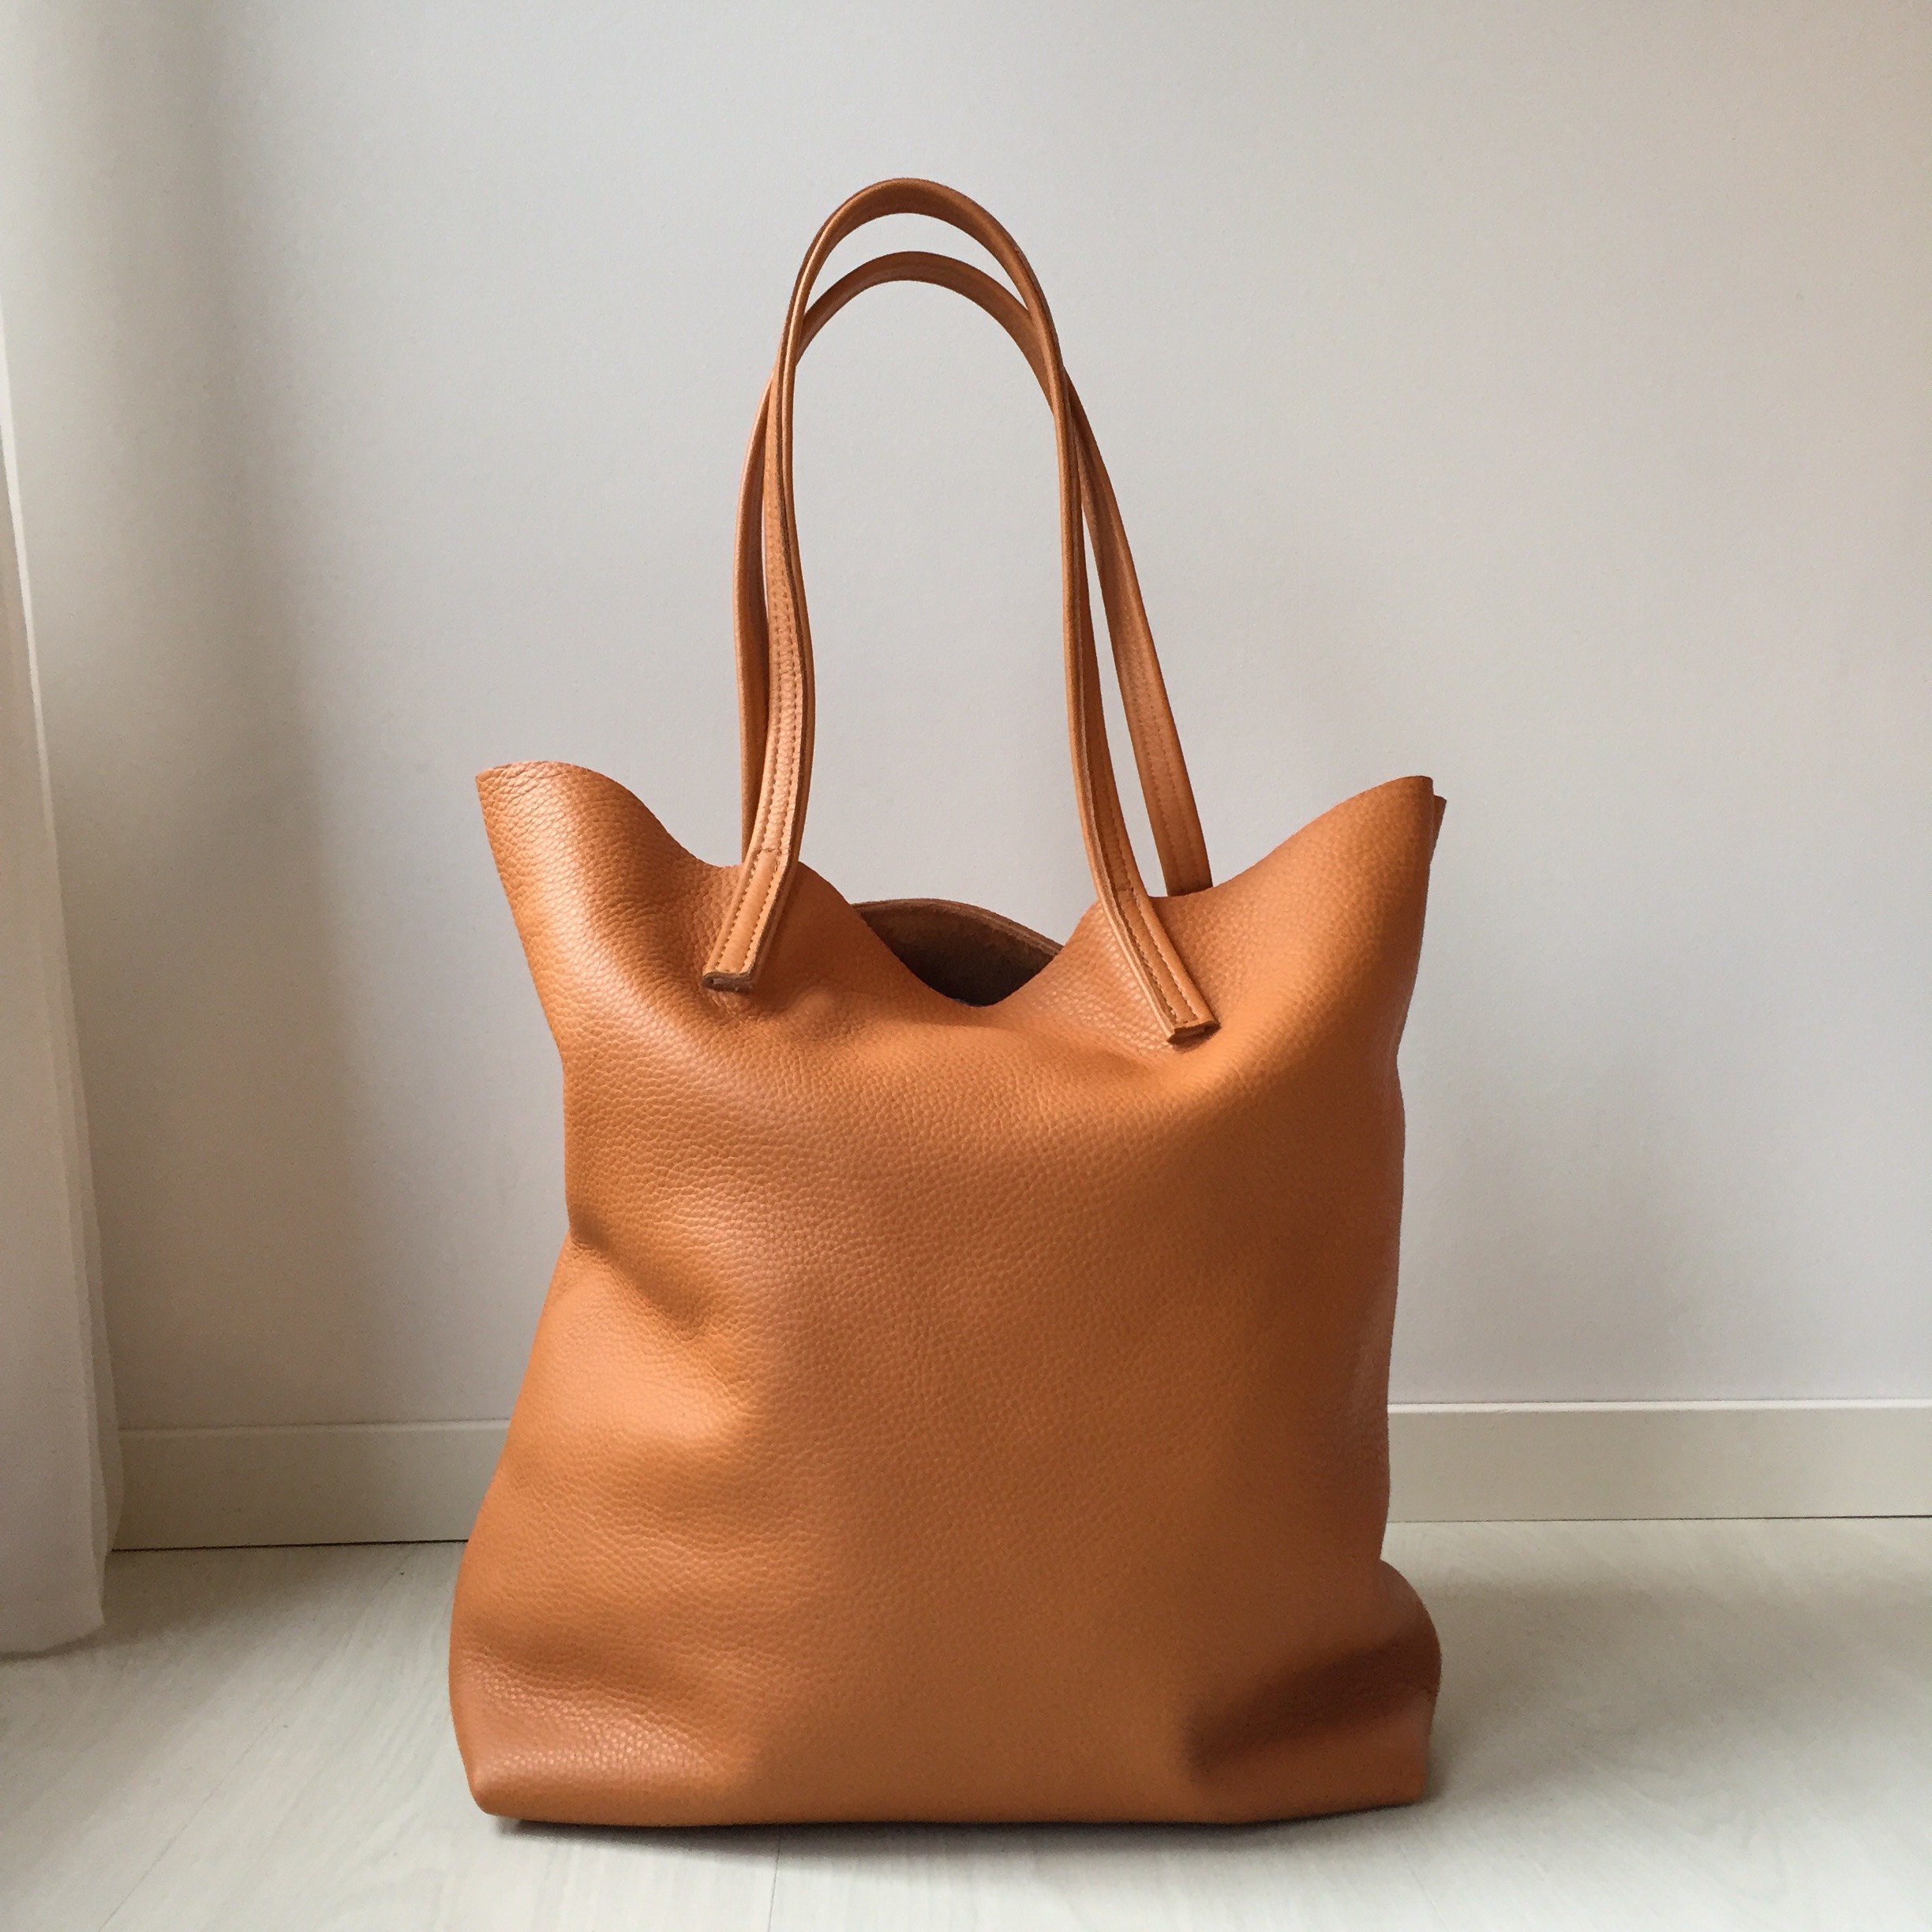 Raw Leather Tote Bag - Cognac